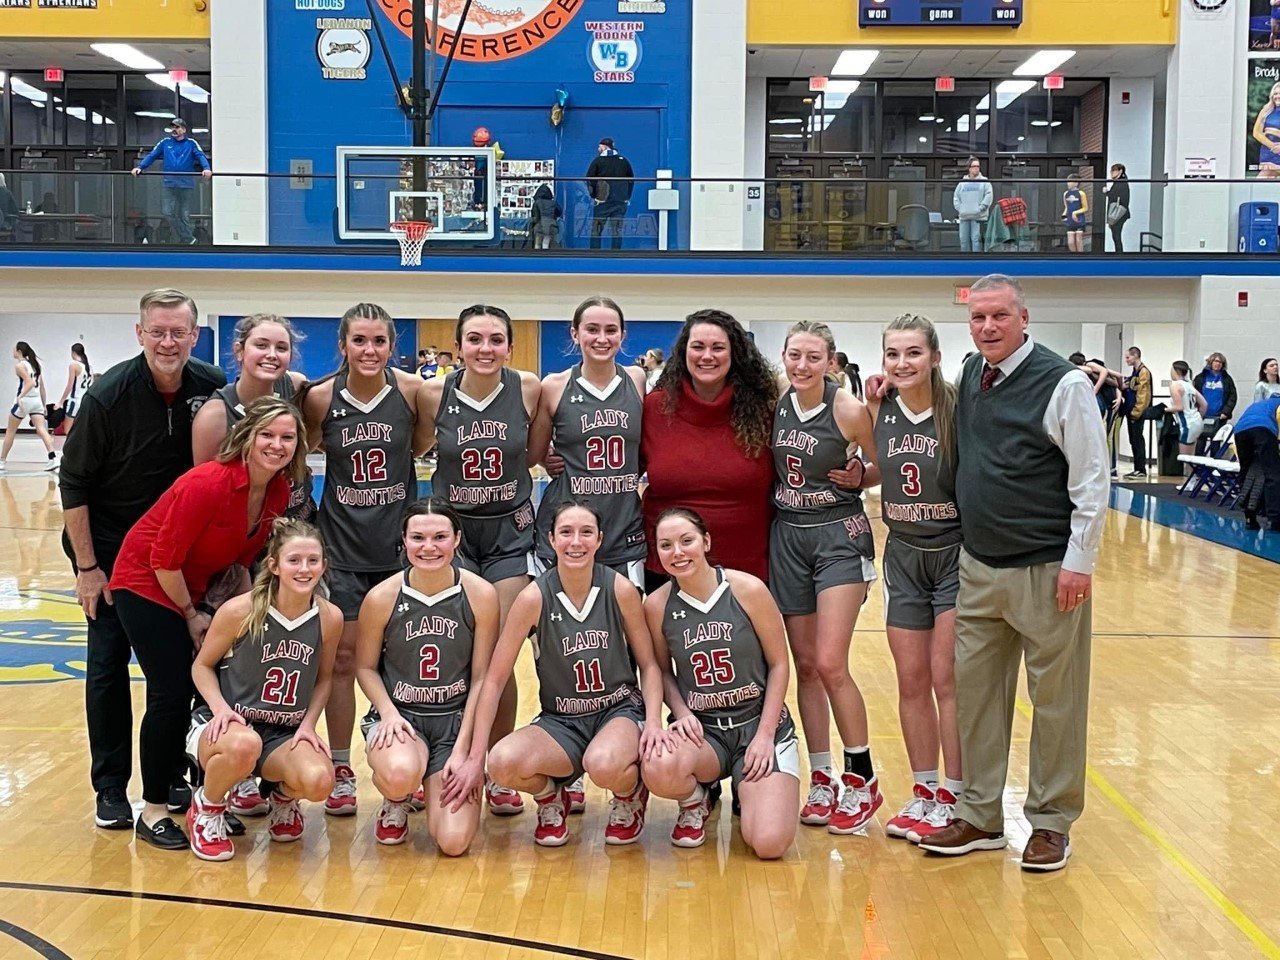 Southmont girls basketball saved their best performance of the season for Saturday as they defeated county rival Crawfordsville 66-34 to claim the county title.